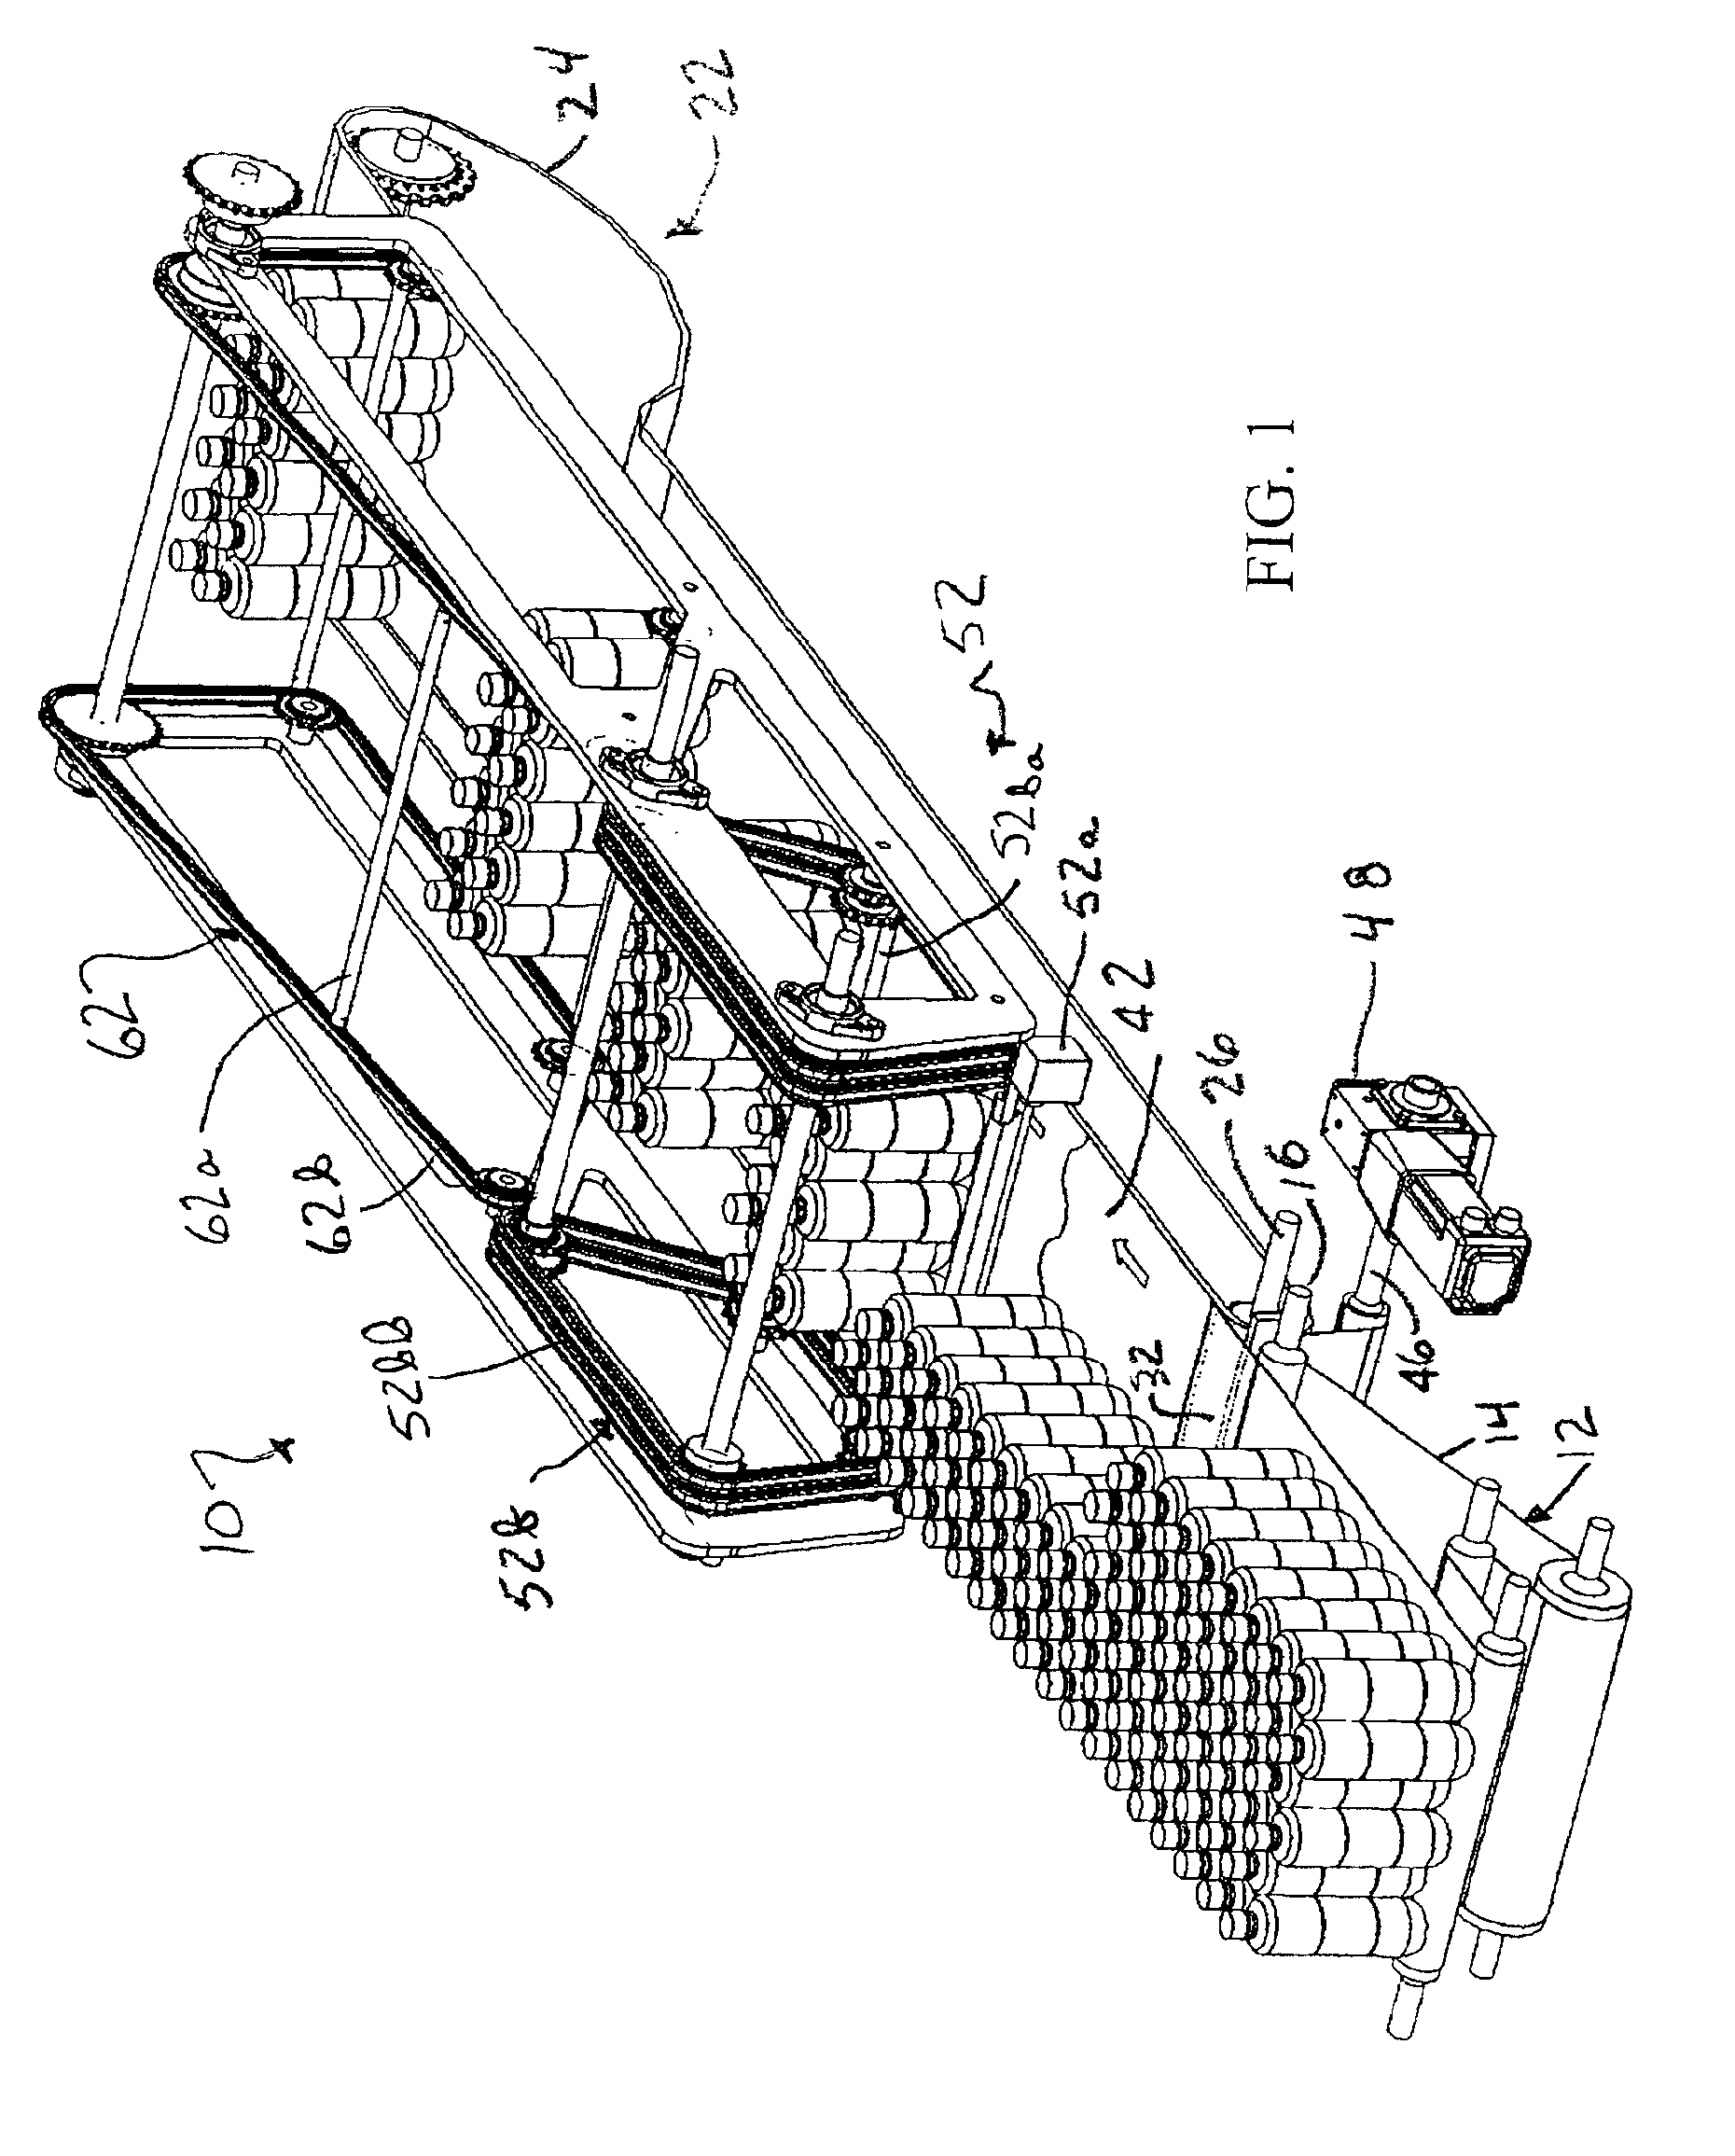 Retractable transfer device metering apparatus and methods